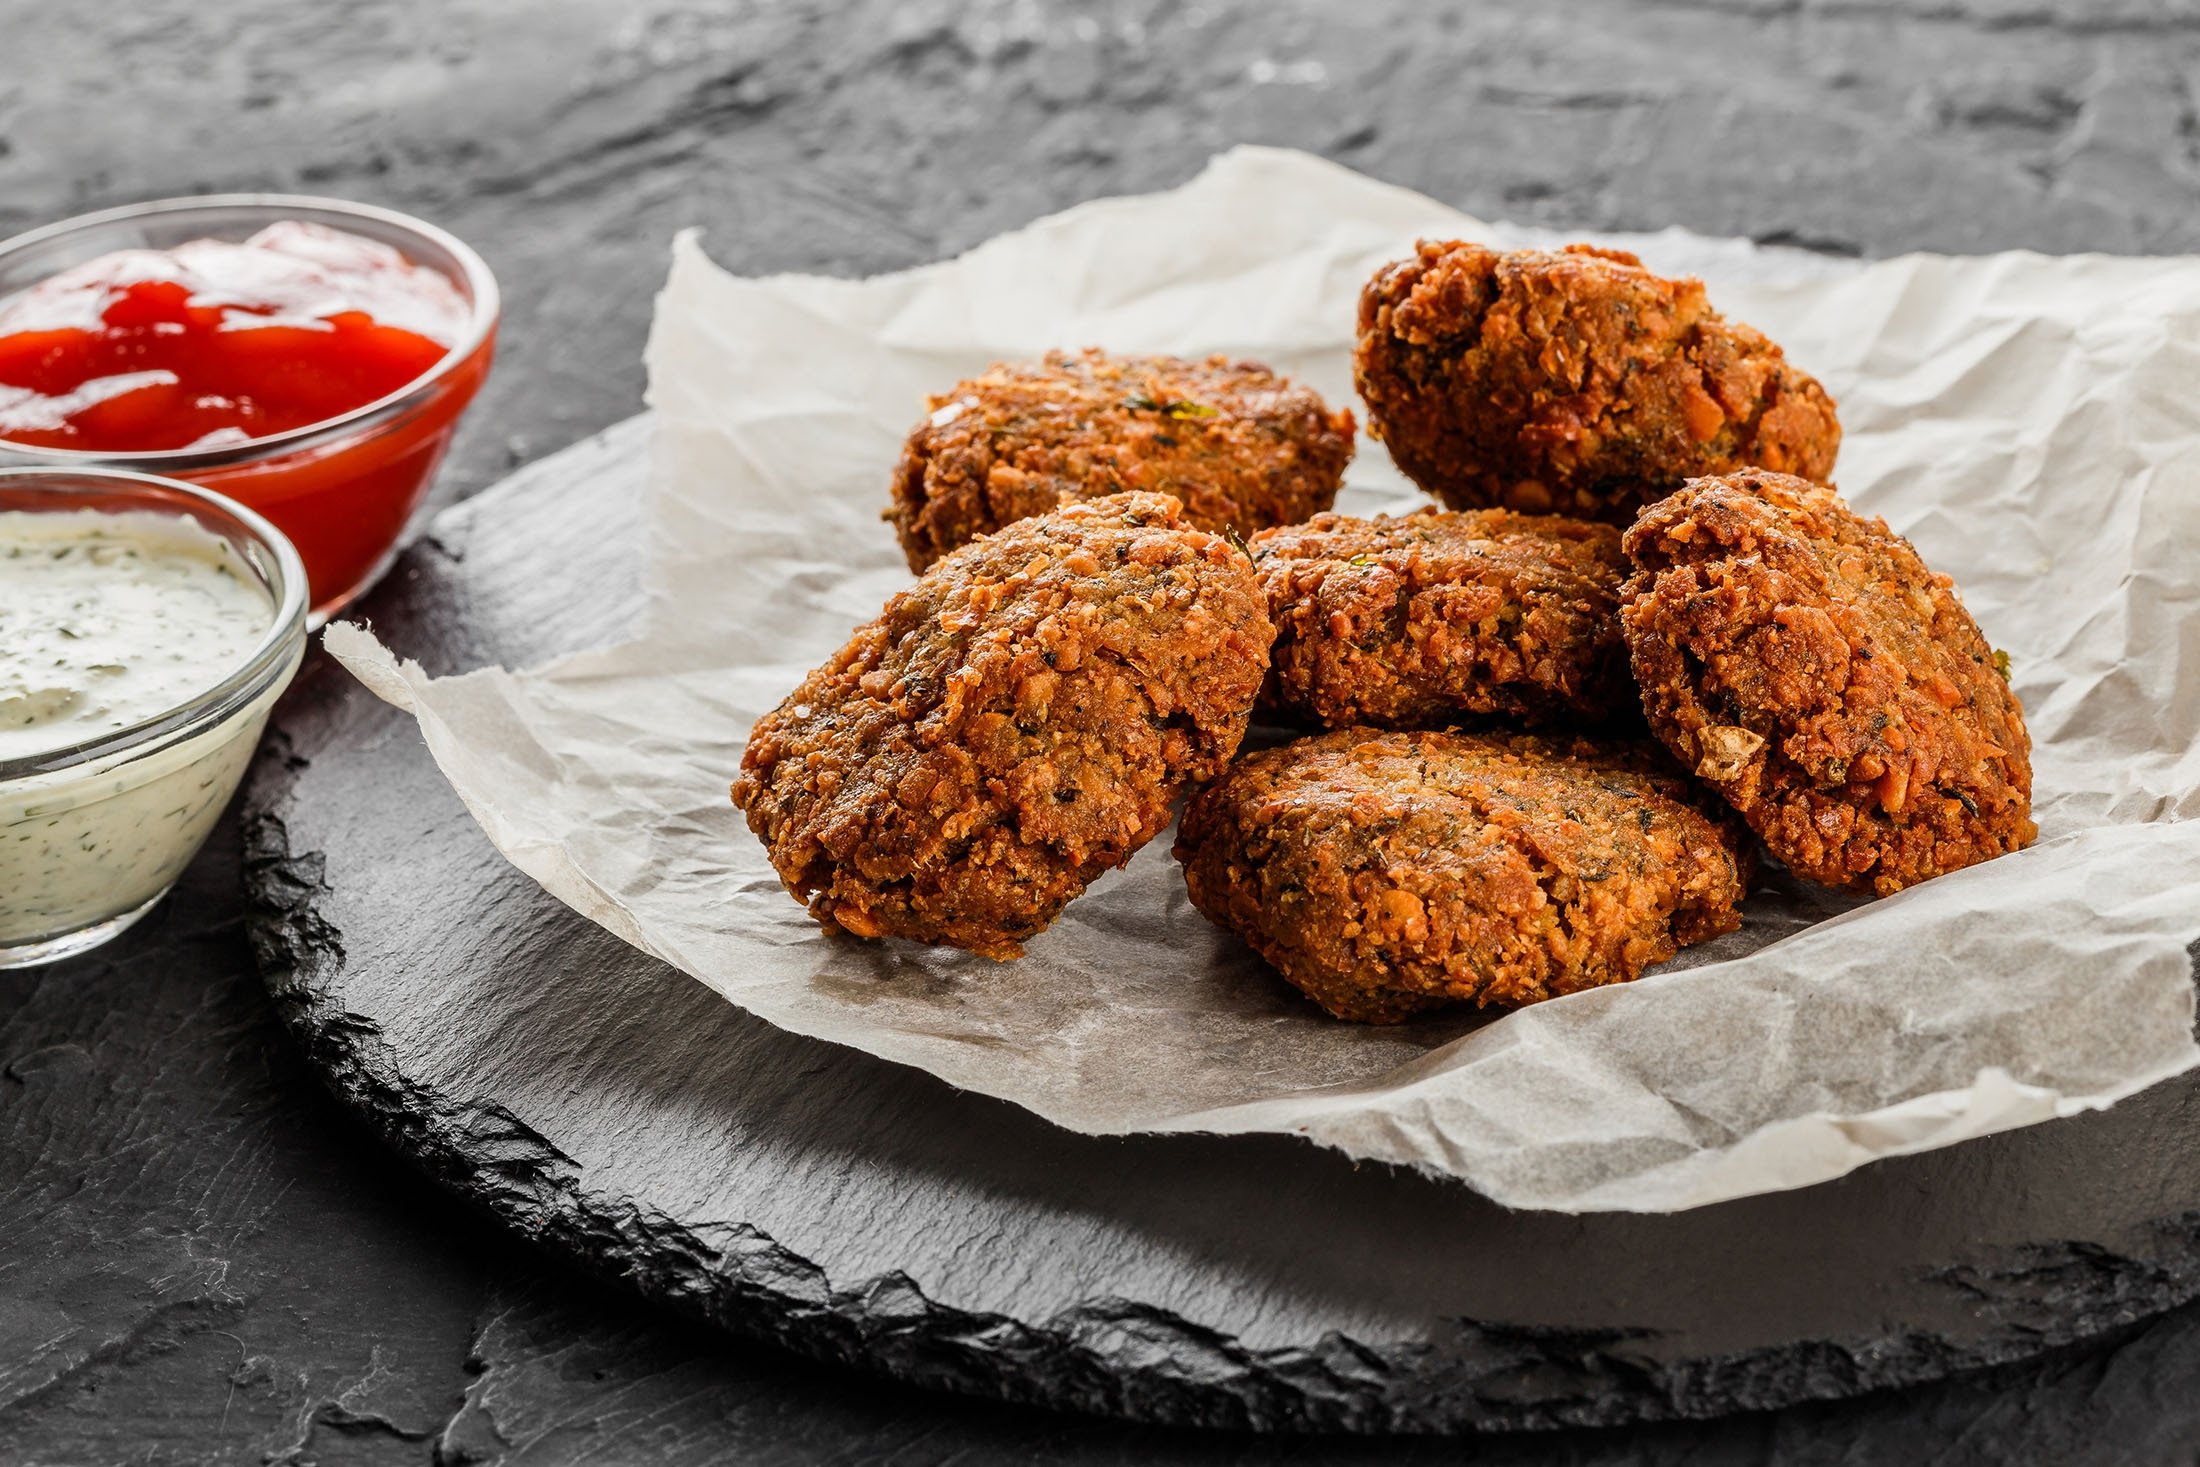 The chickpea falafel is excellent, but the lentils could be even better.  (Photo Shutterstock)